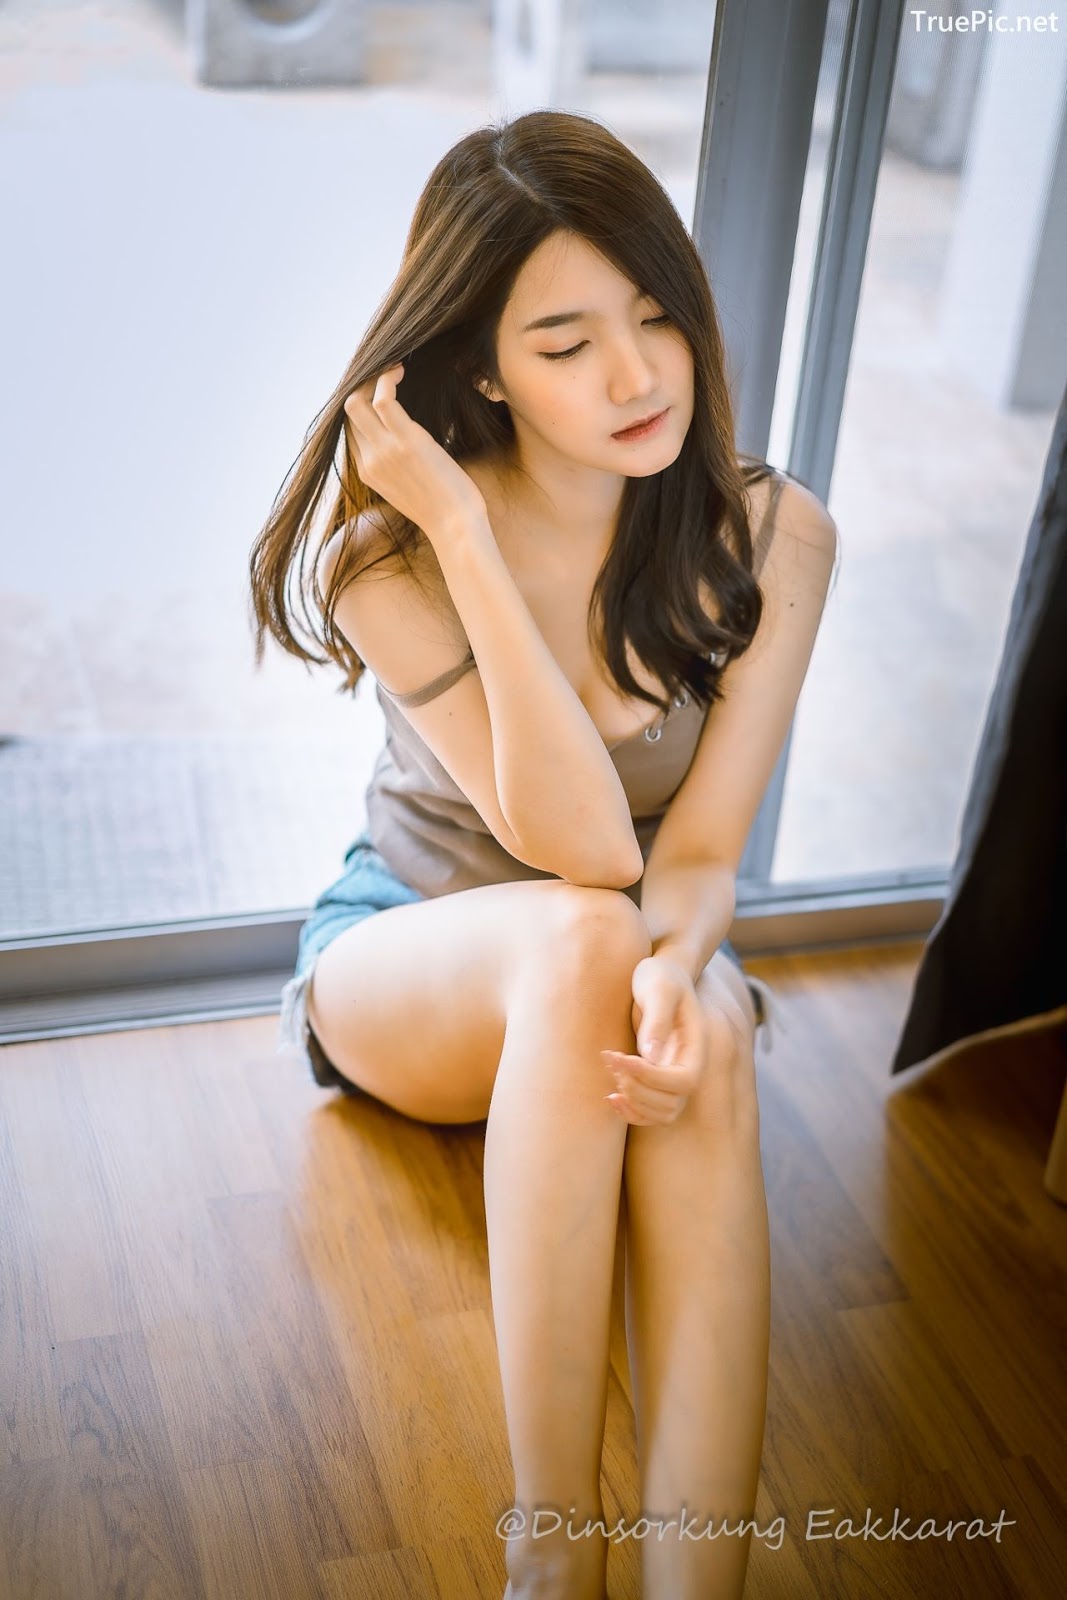 Image-Thailand-Cute-Model-Creammy-Chanama-Concept-Naughty-Angel-Girl-TruePic.net- Picture-12